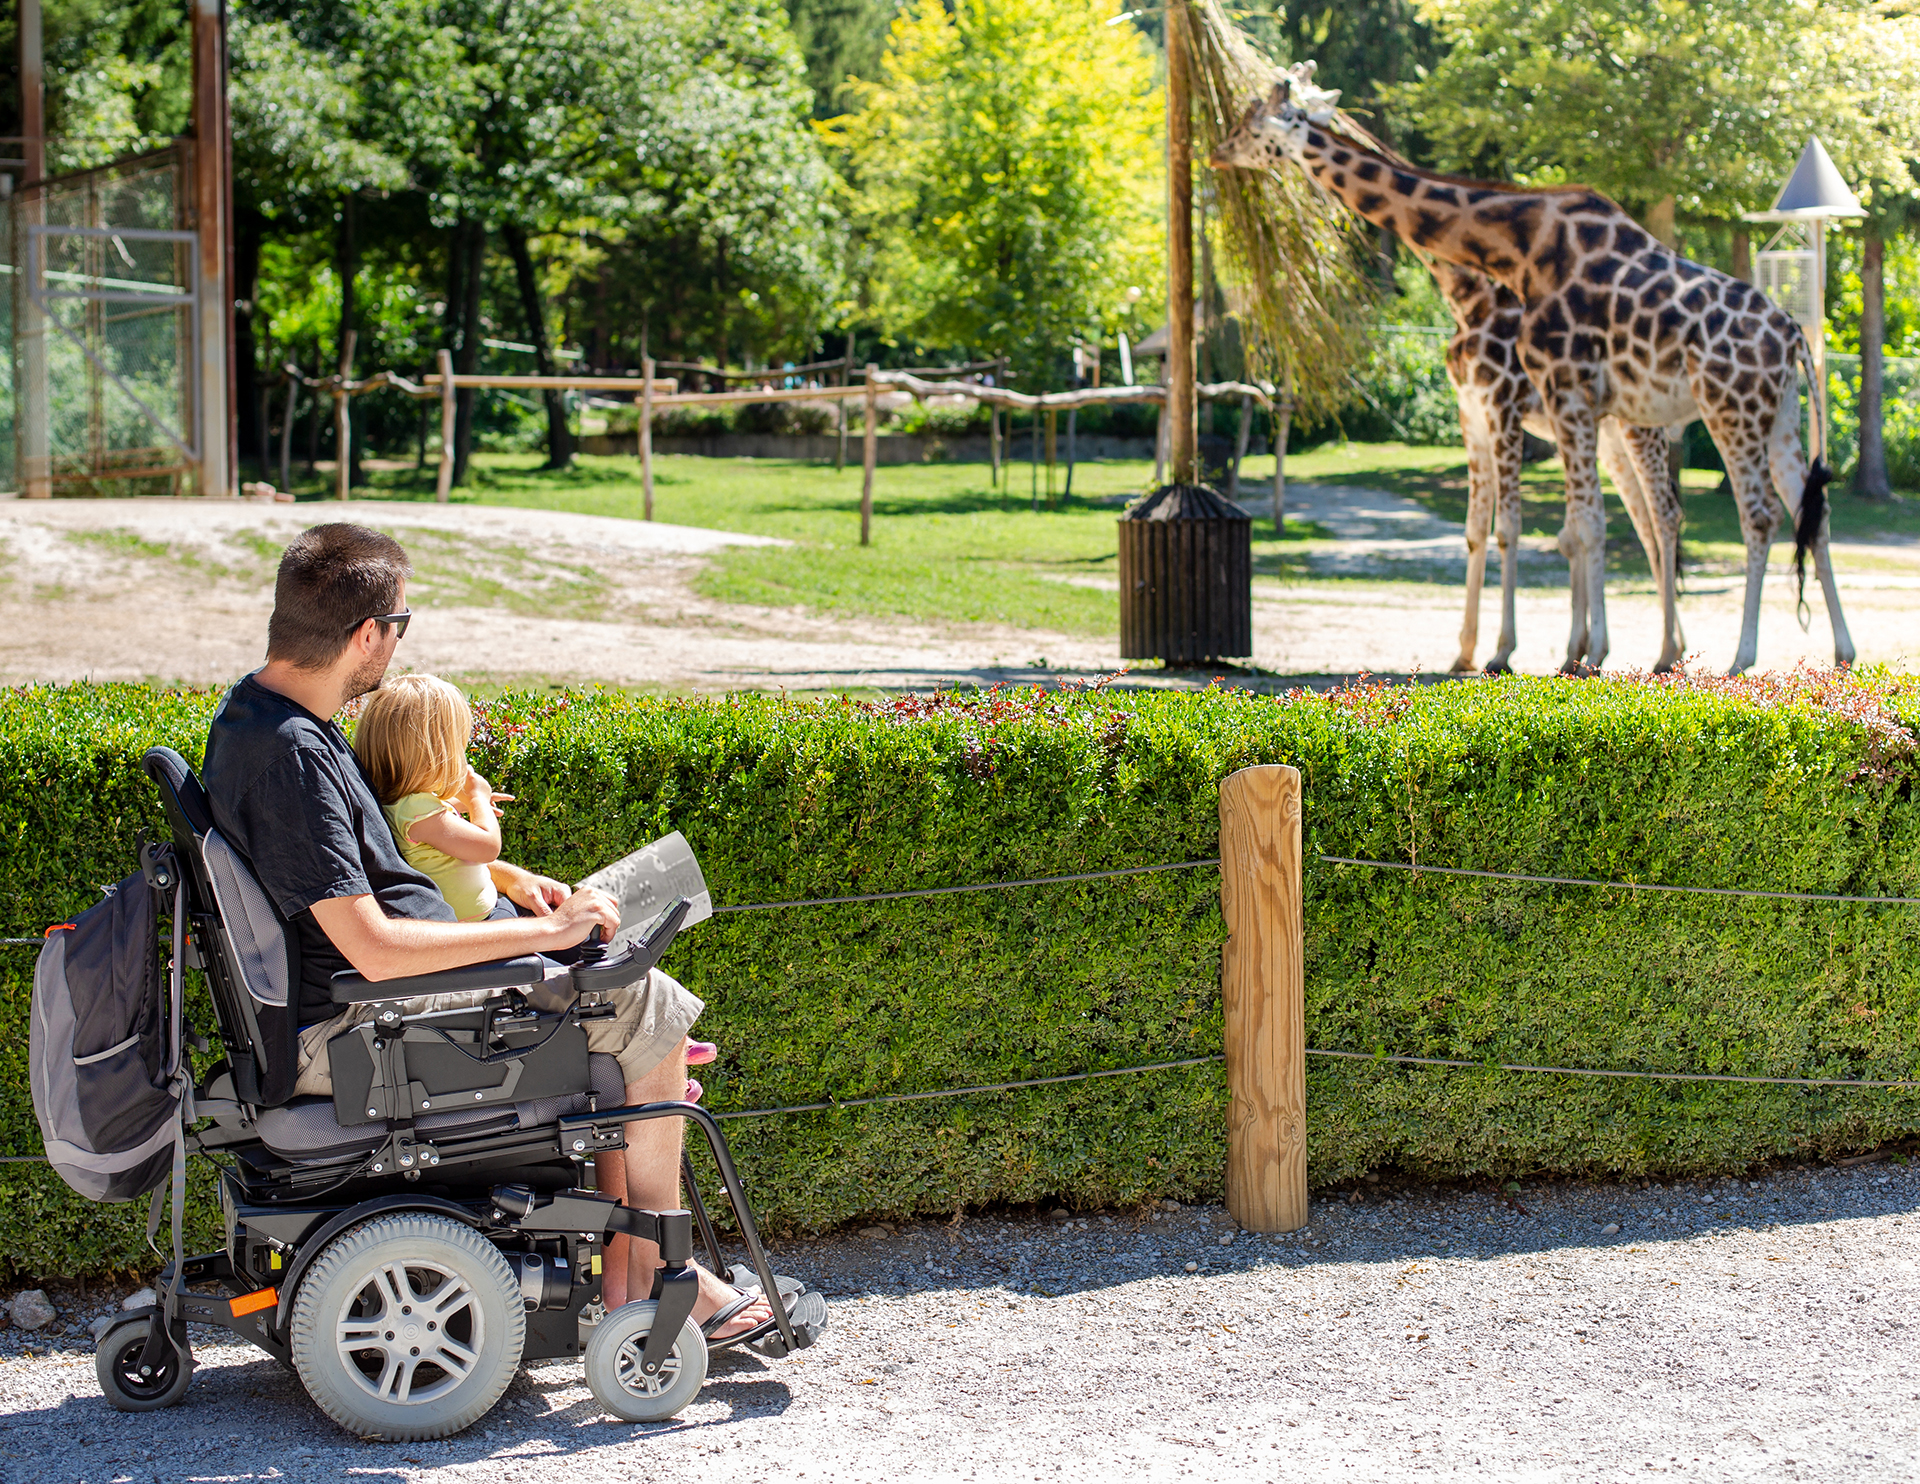 A father and daughter watching a giraffe